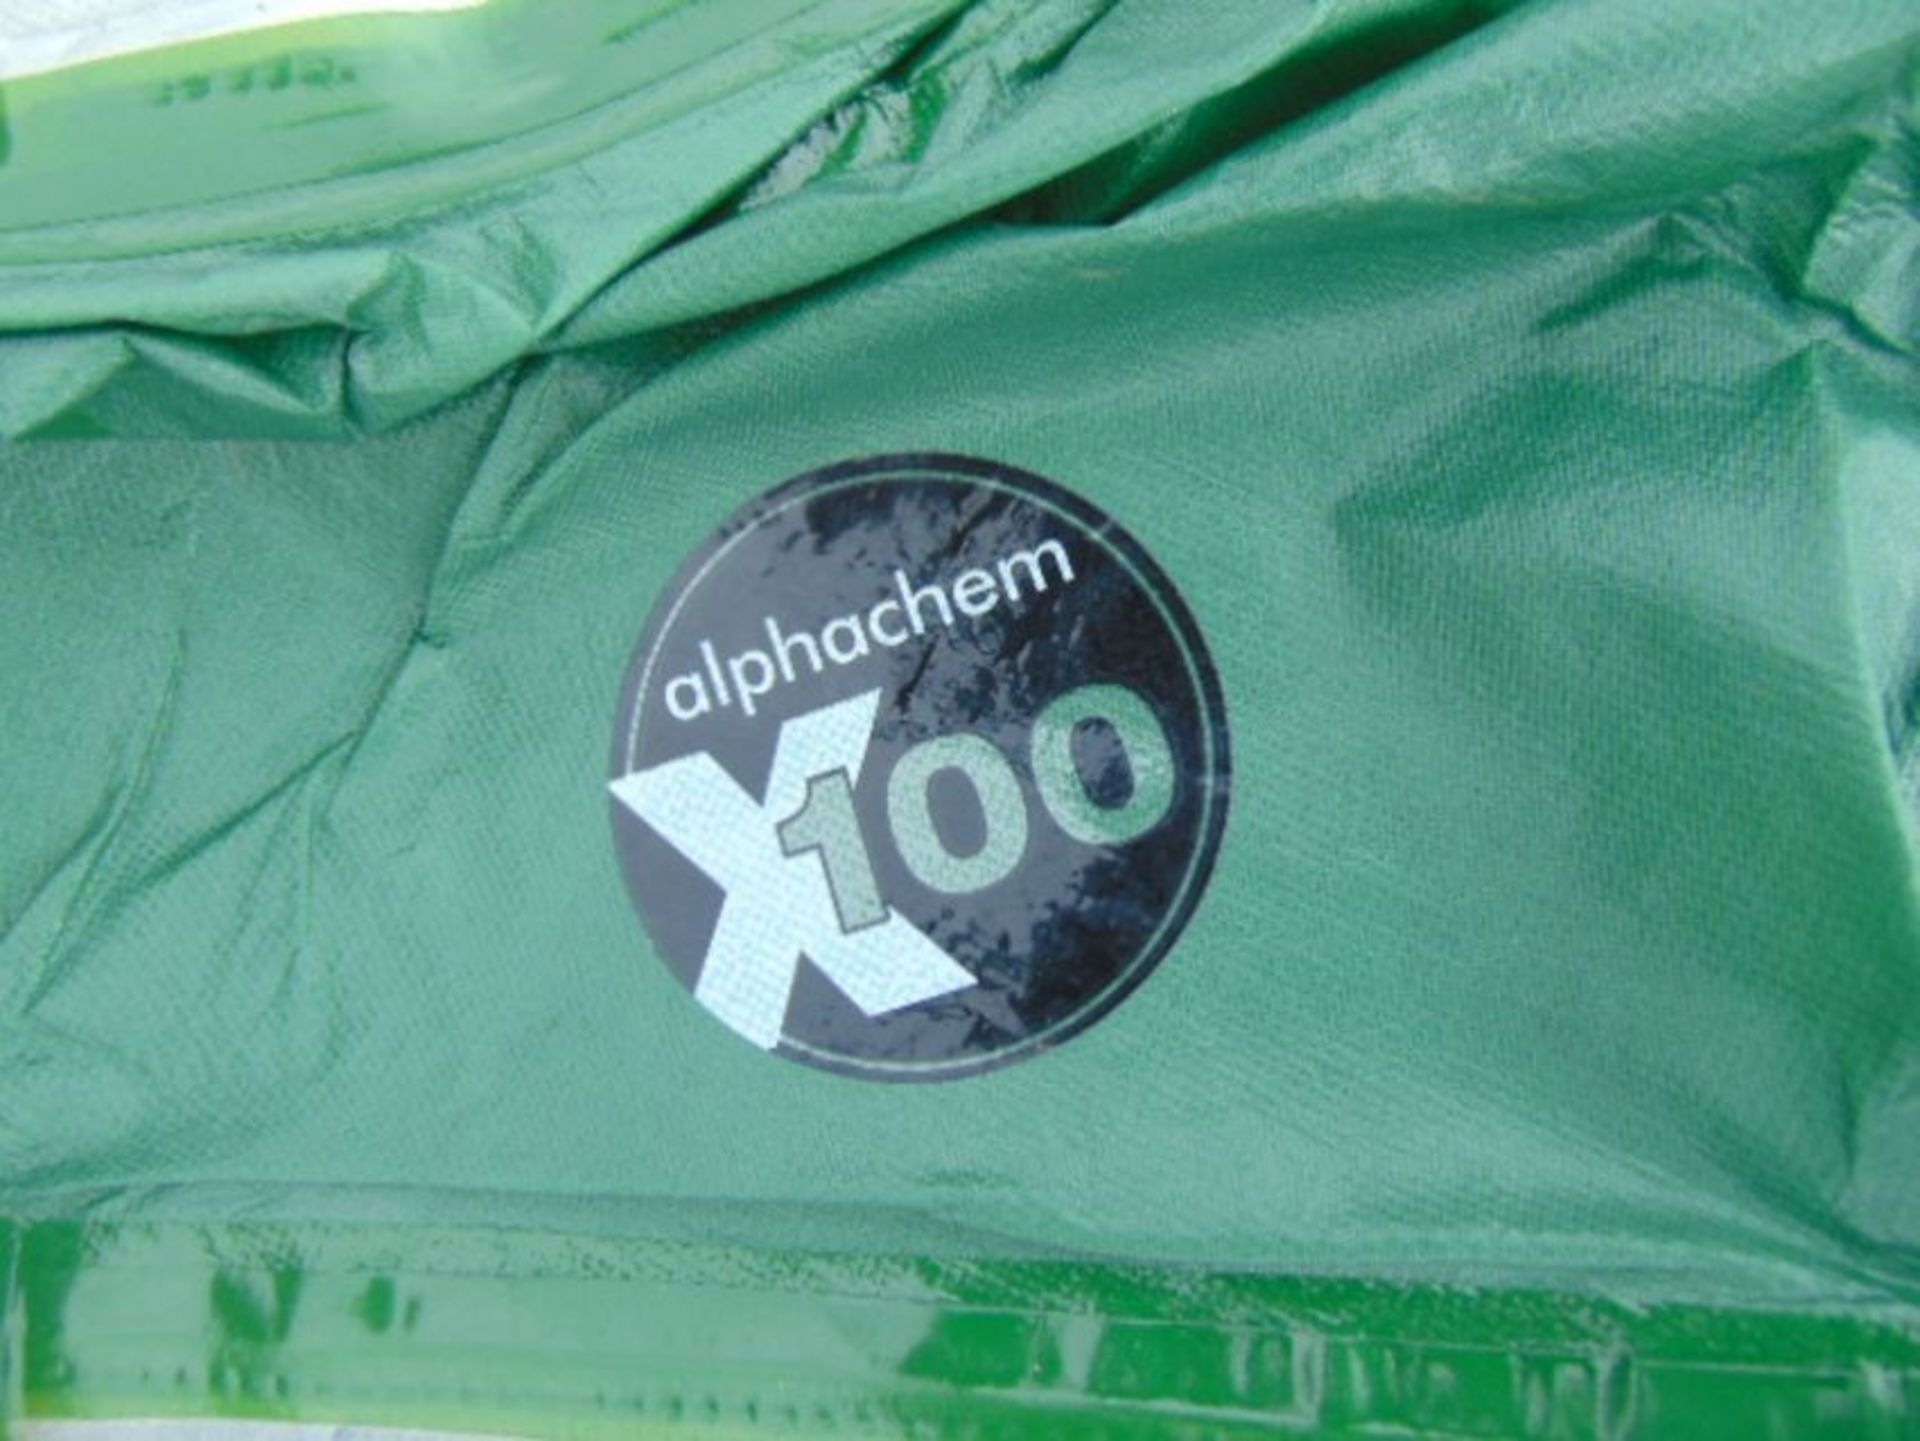 13 x Unissued Alphachem X100 Chemical Coveralls - Image 3 of 4